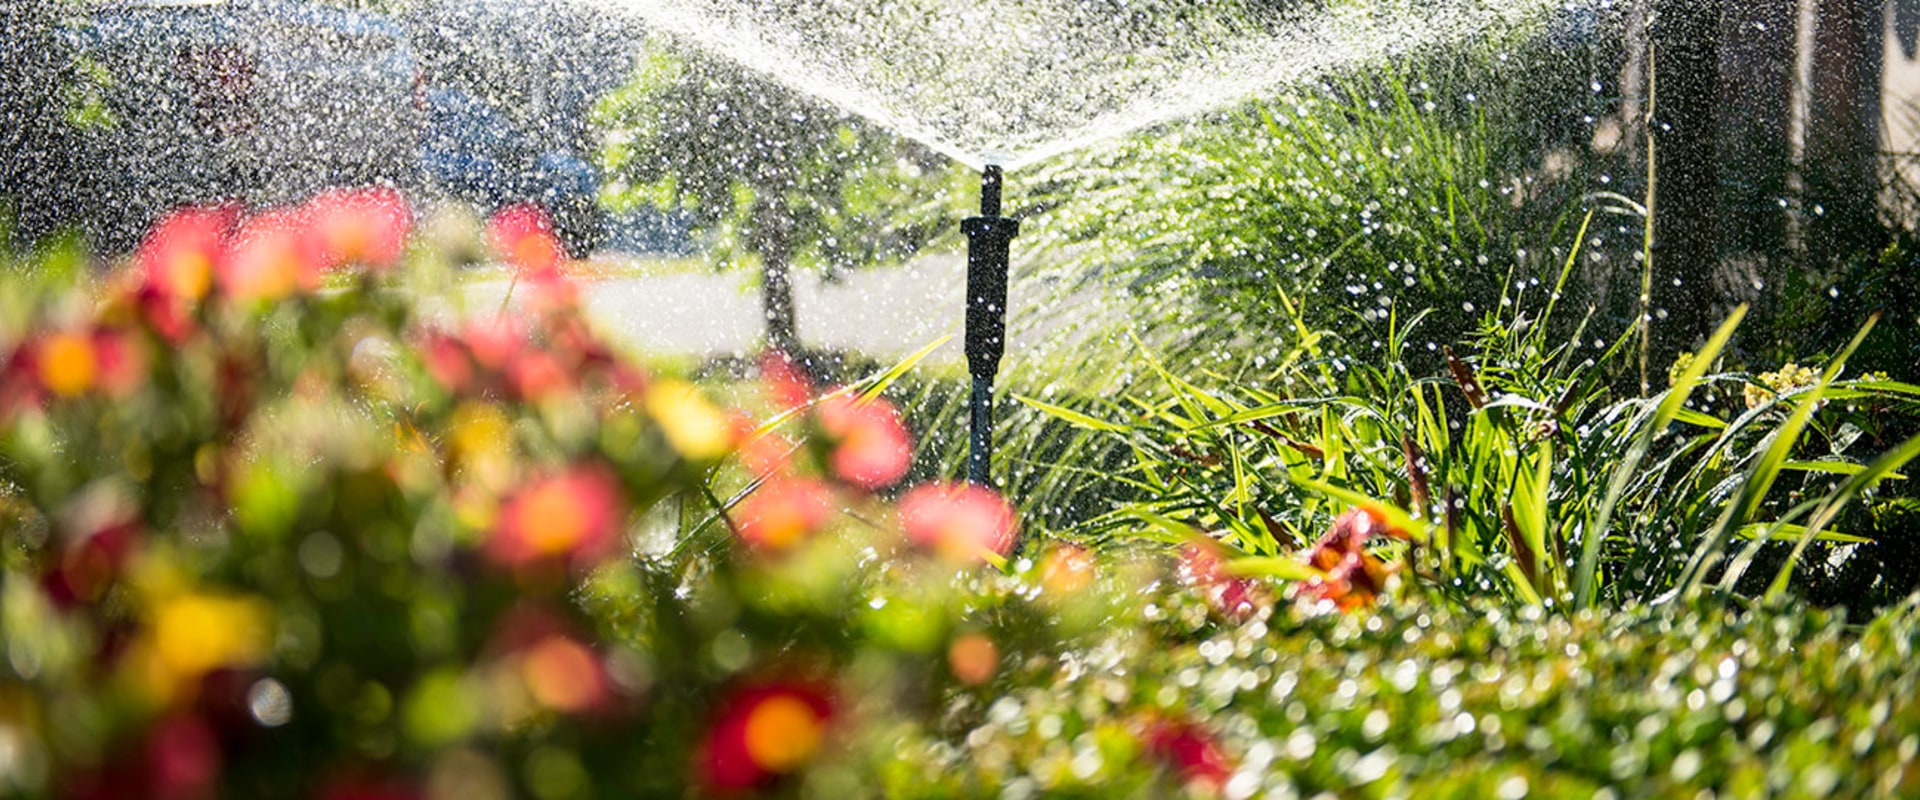 A Complete Guide to Installing Irrigation Systems in New Zealand